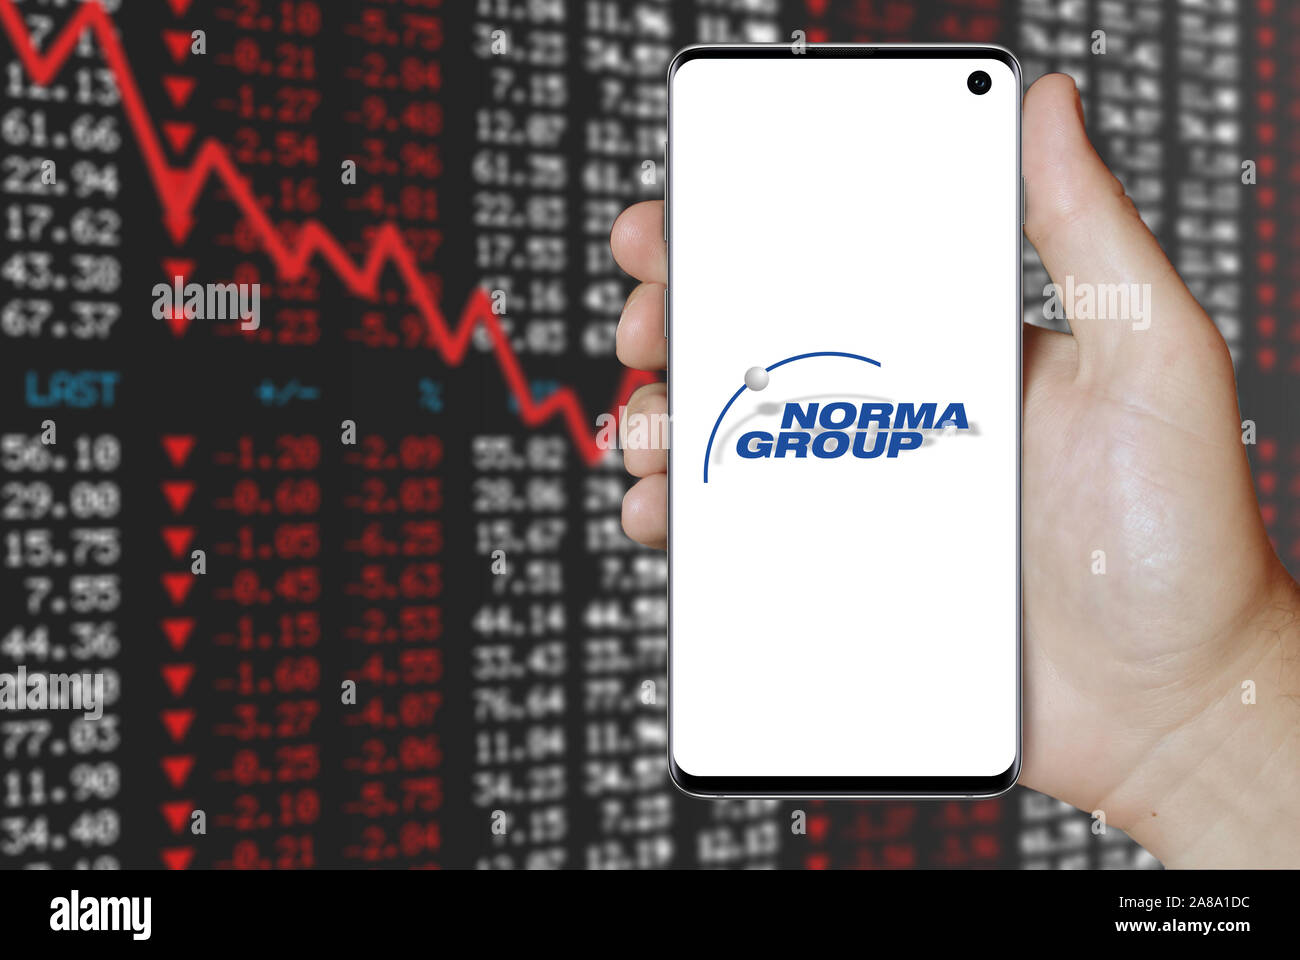 Logo of public company Norma Group displayed on a smartphone. Negative stock market background. Credit: PIXDUCE Stock Photo